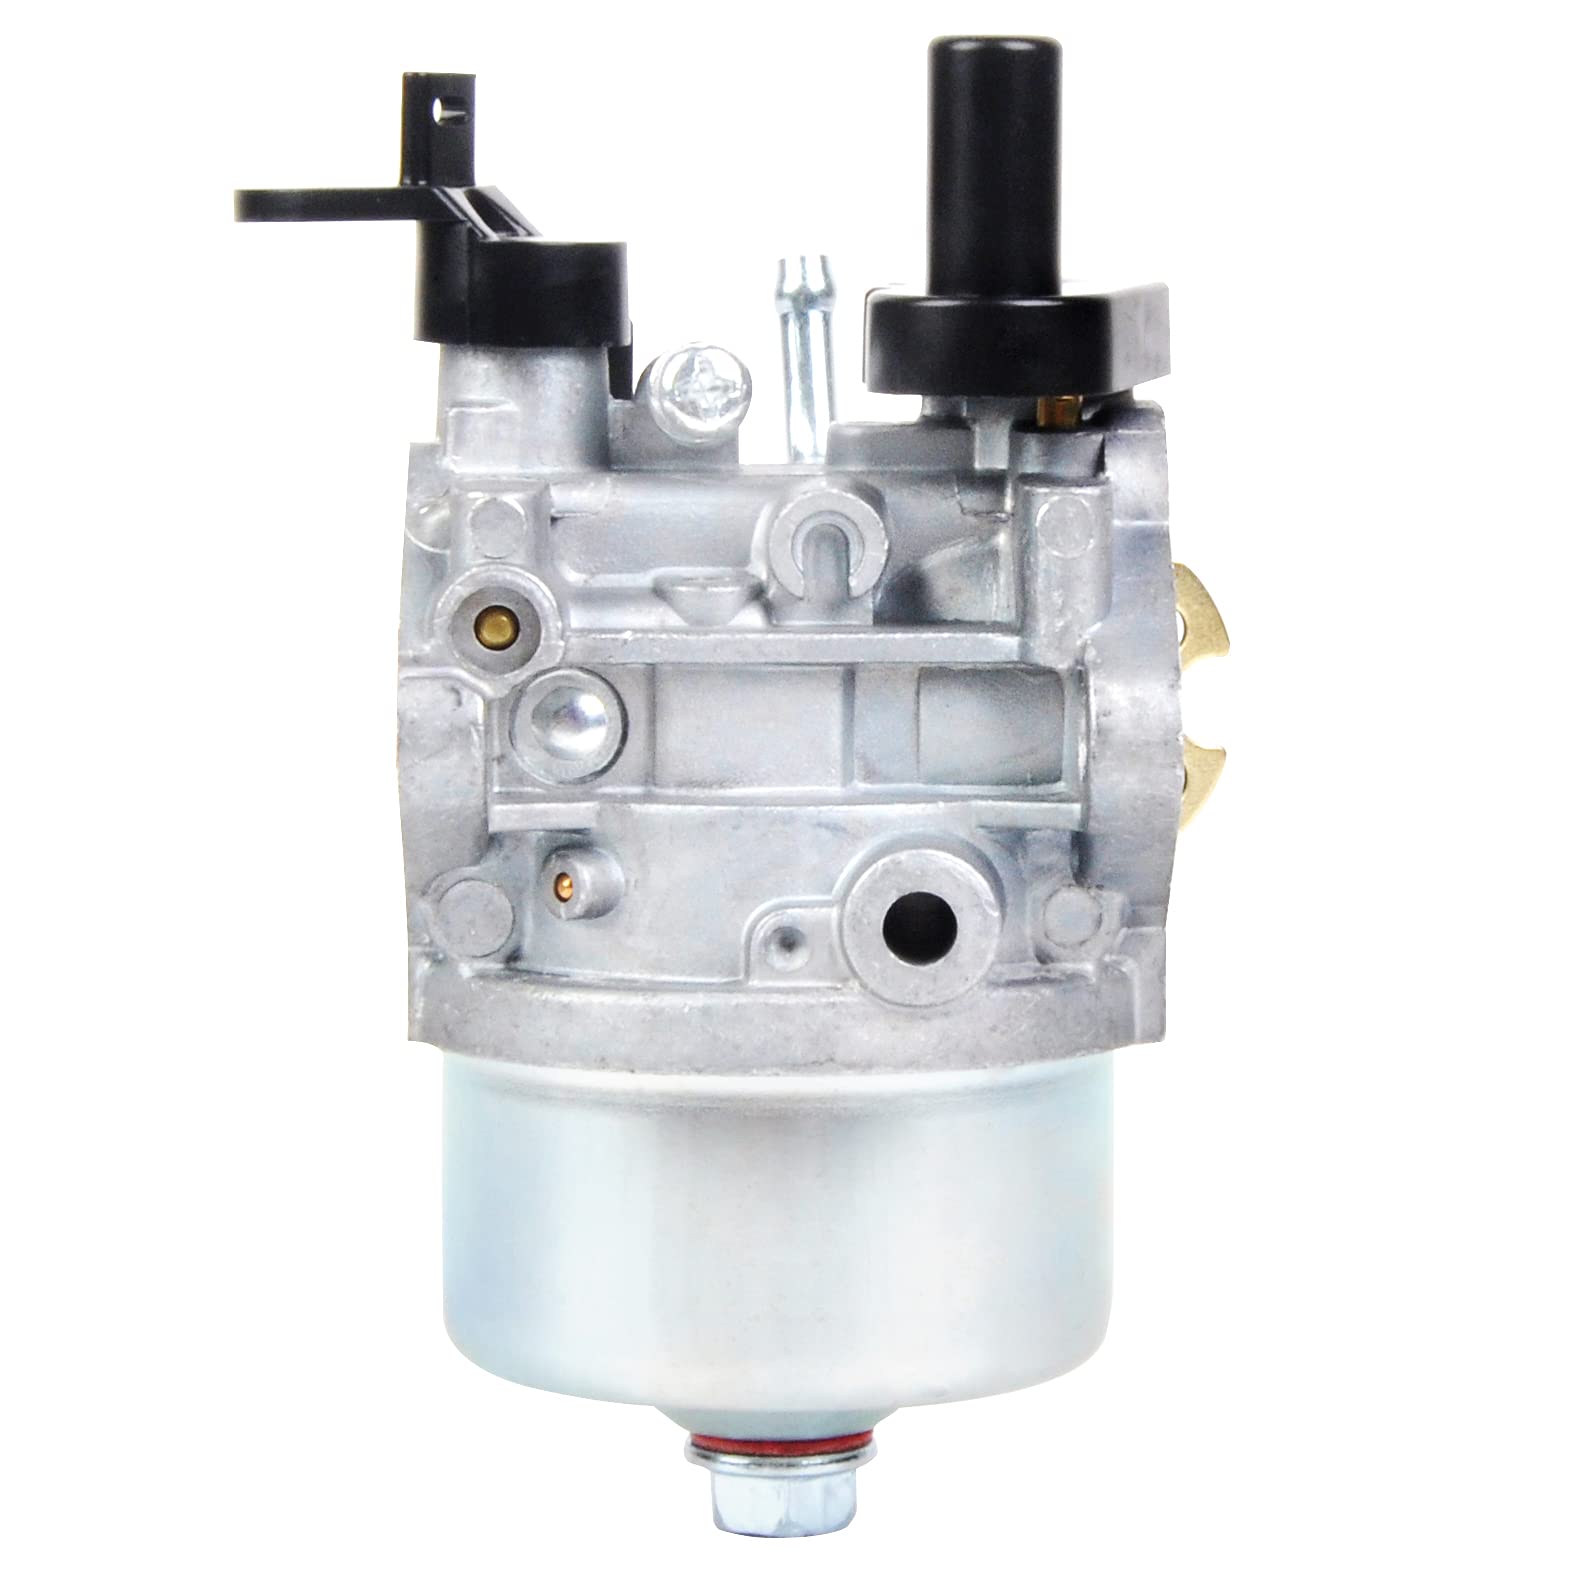 Carburetor For Toro 38584 Power Clear 221QE 21" 141cc 2-Cycle Snow Blower